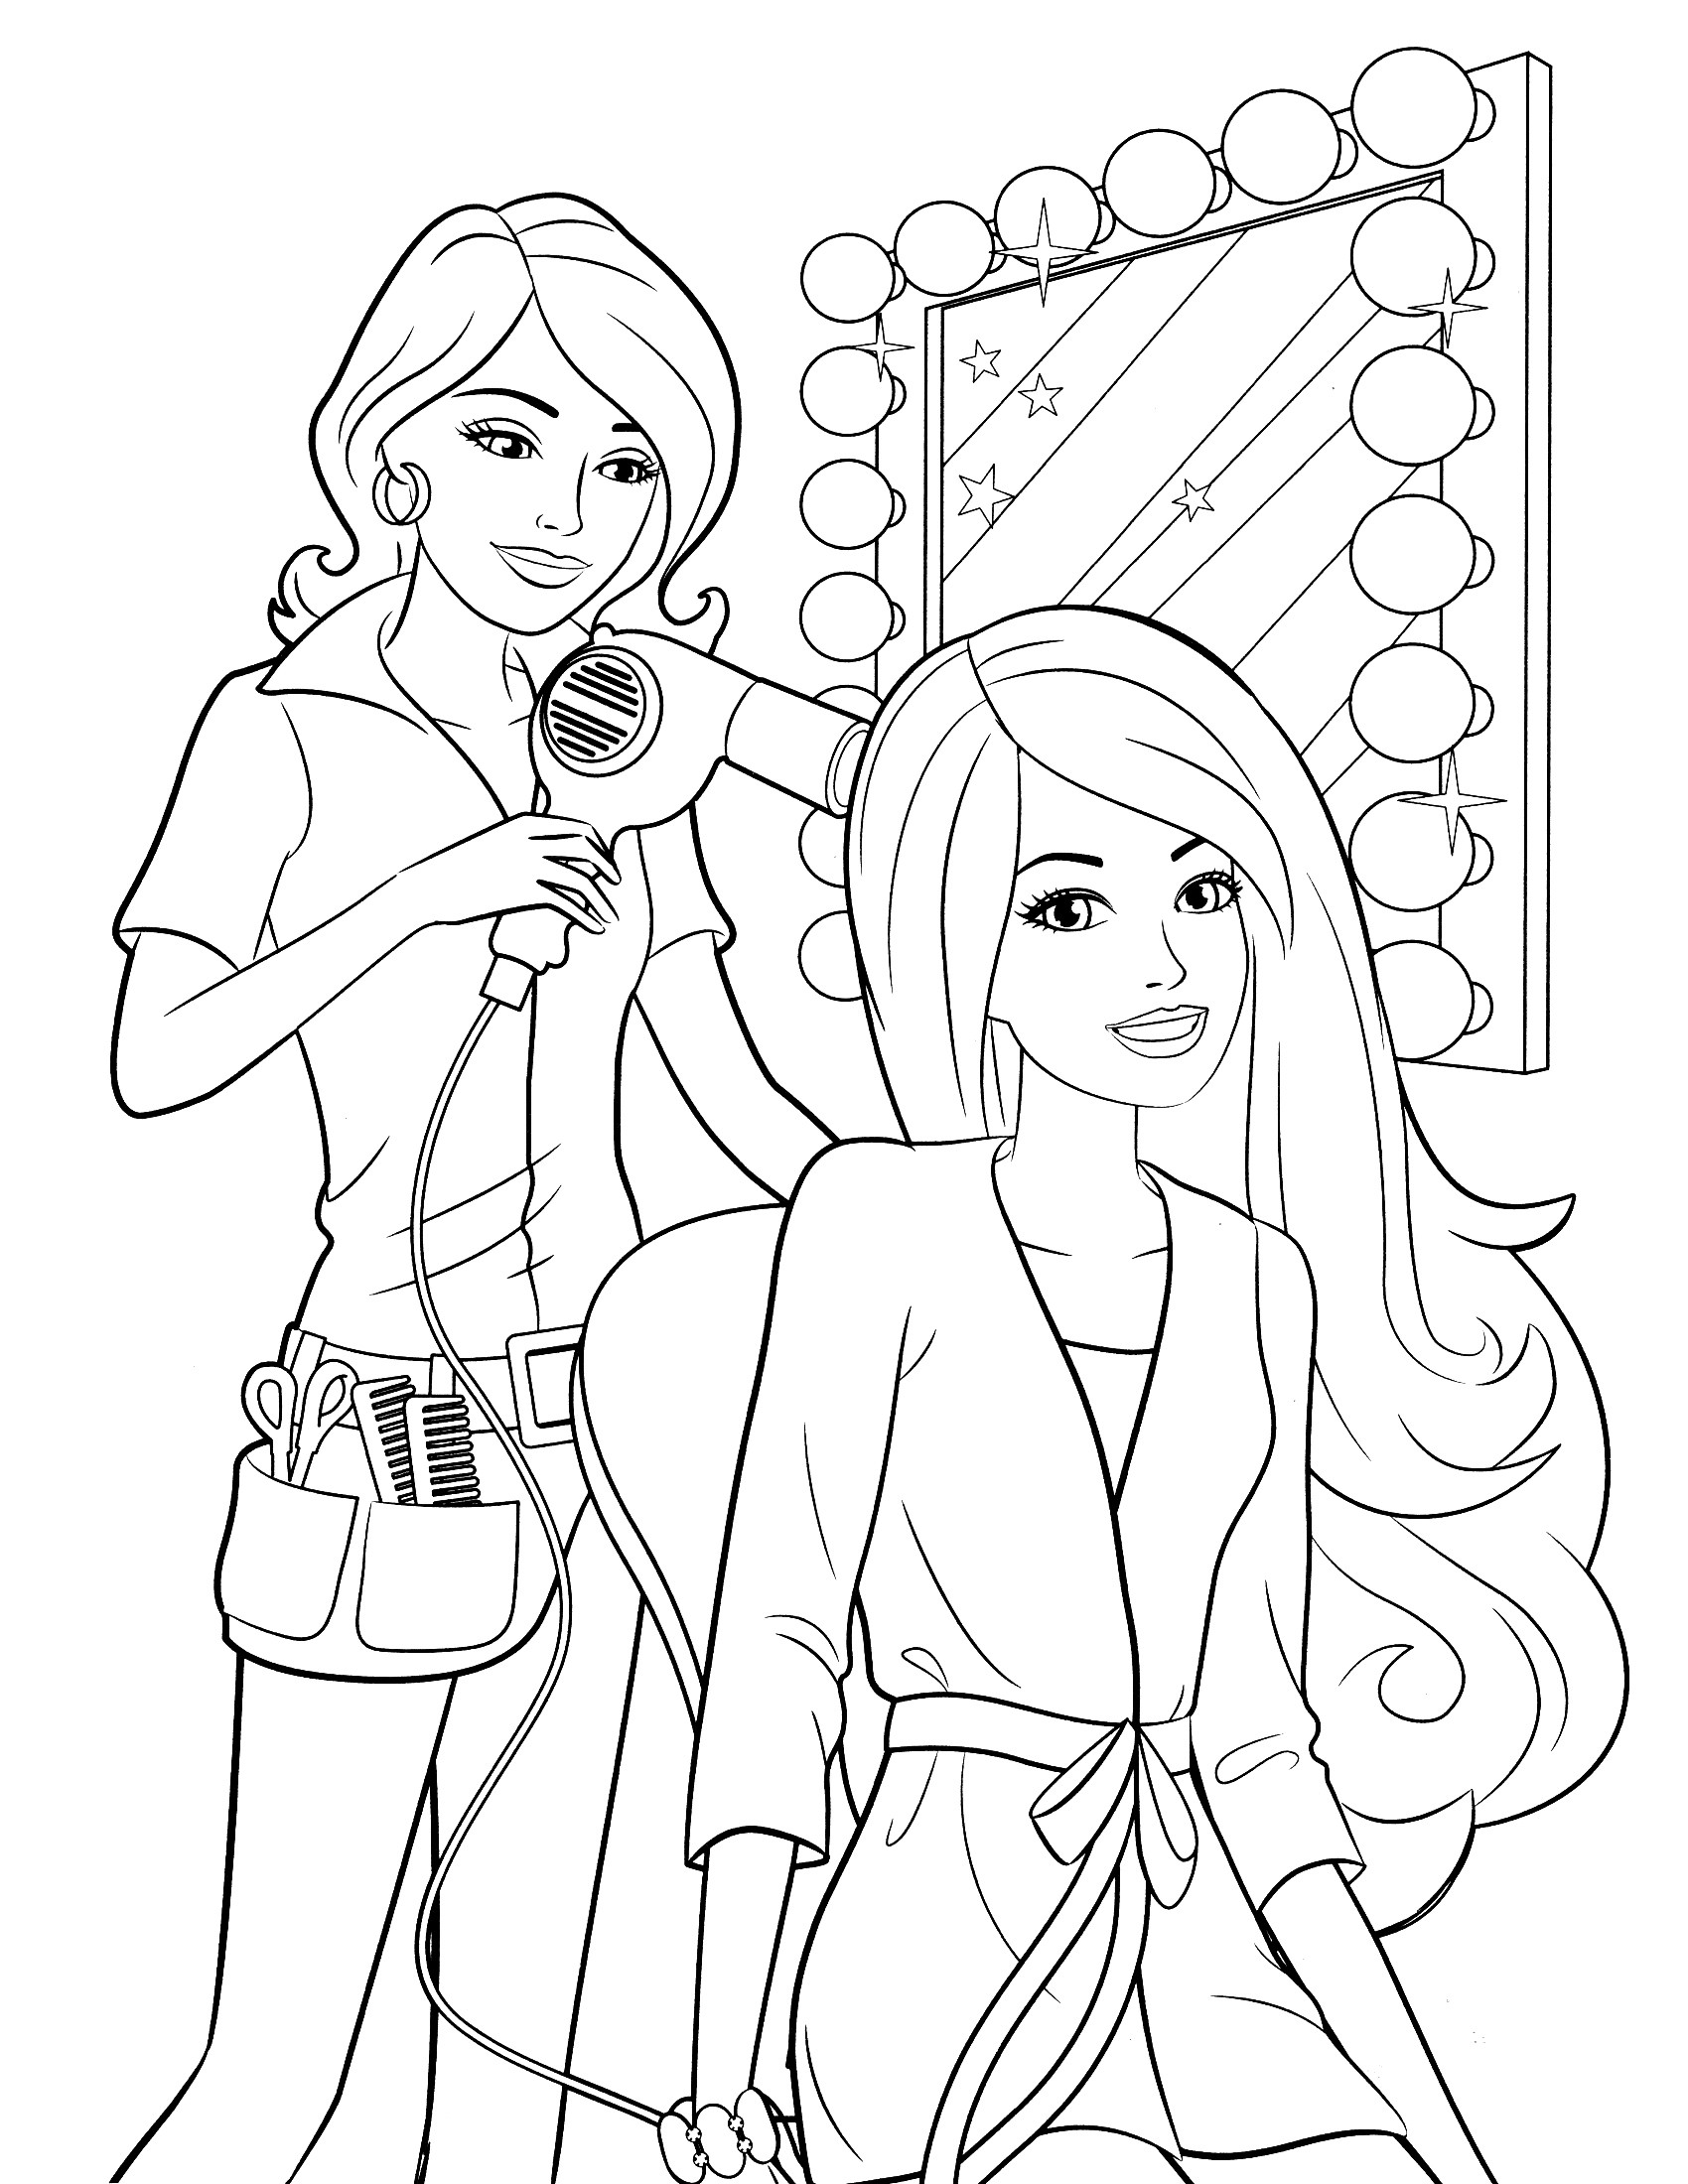 Free Girls Coloring Pages
 Coloring Pages for Girls Best Coloring Pages For Kids